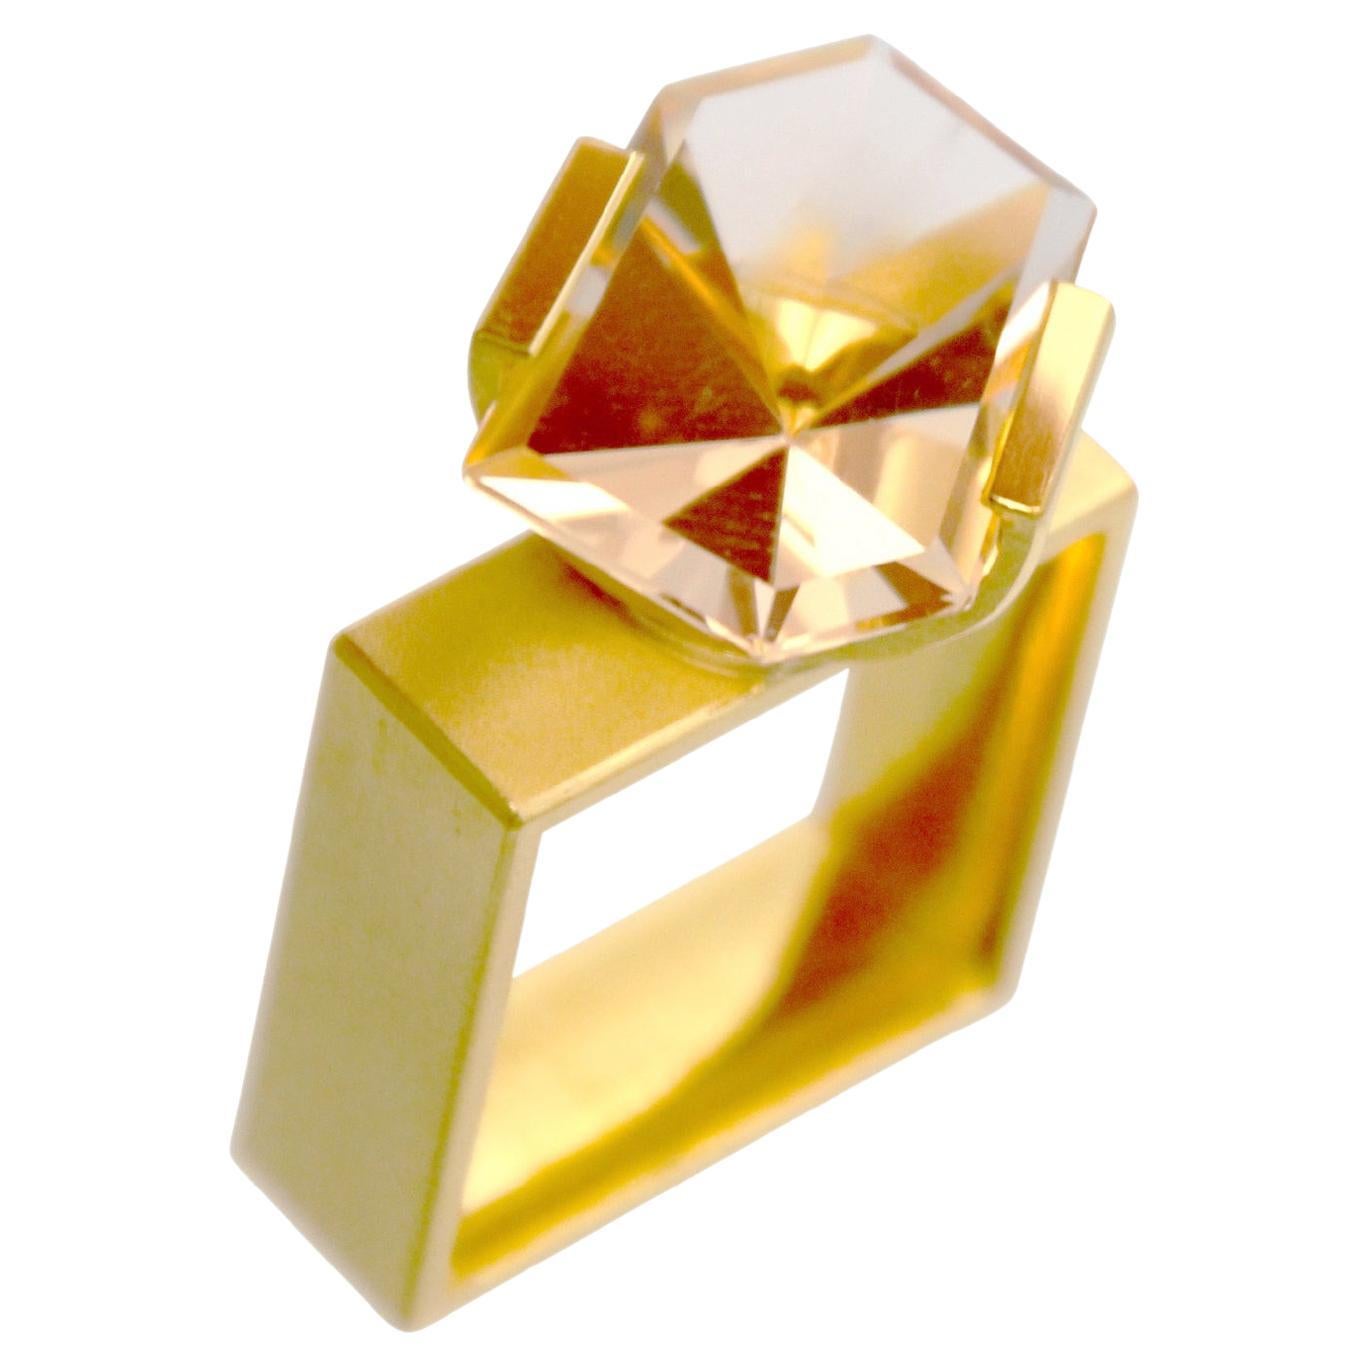 Contemporary 18 karat Yellow GOld Citrine Cocktail Ring 

Minimalist, modern, elegant - handcrafted in our atelier, designed by Arno Schneider.

Fine jewelry, high quality, delicate materials, unique design, a melange of art genres. Through Arno